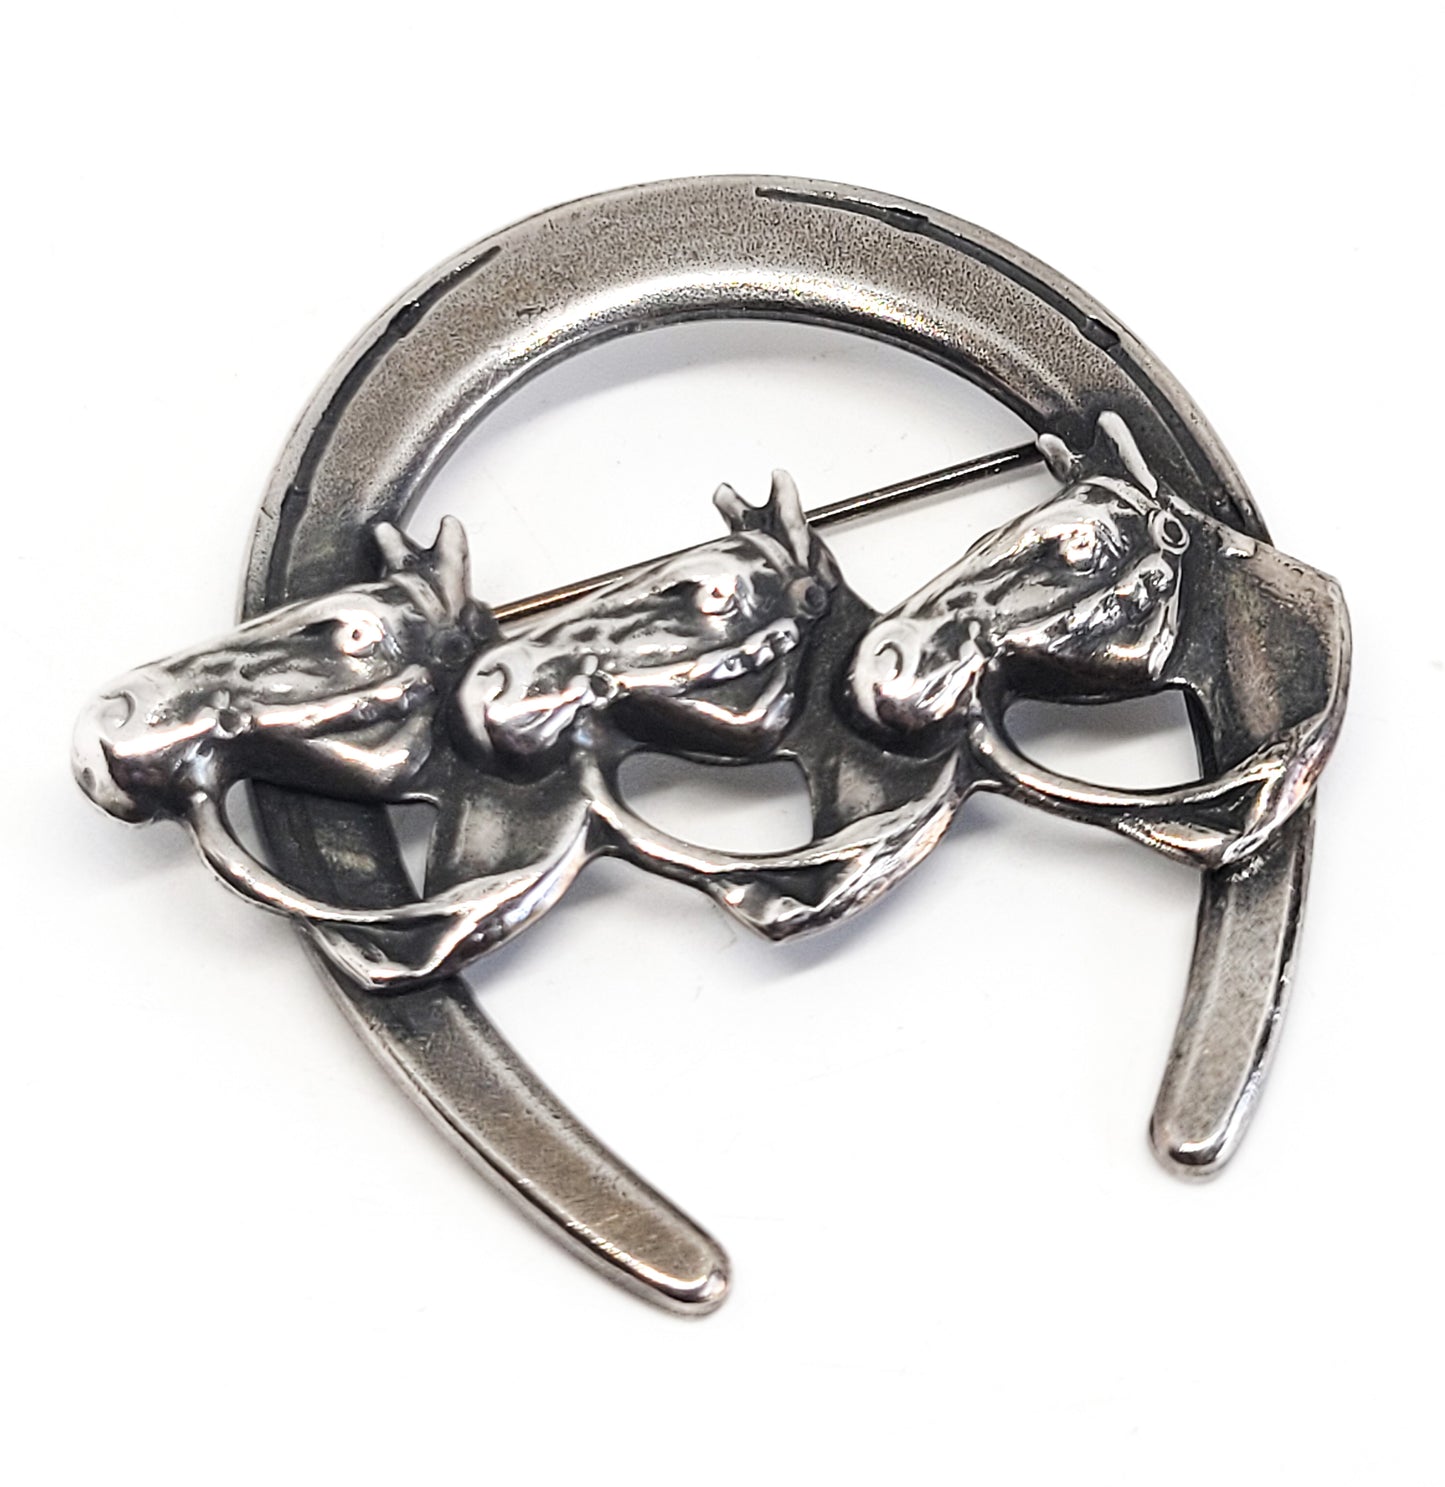 Equestrian triple horse bridle silver toned vintage horseshoe brooch pin